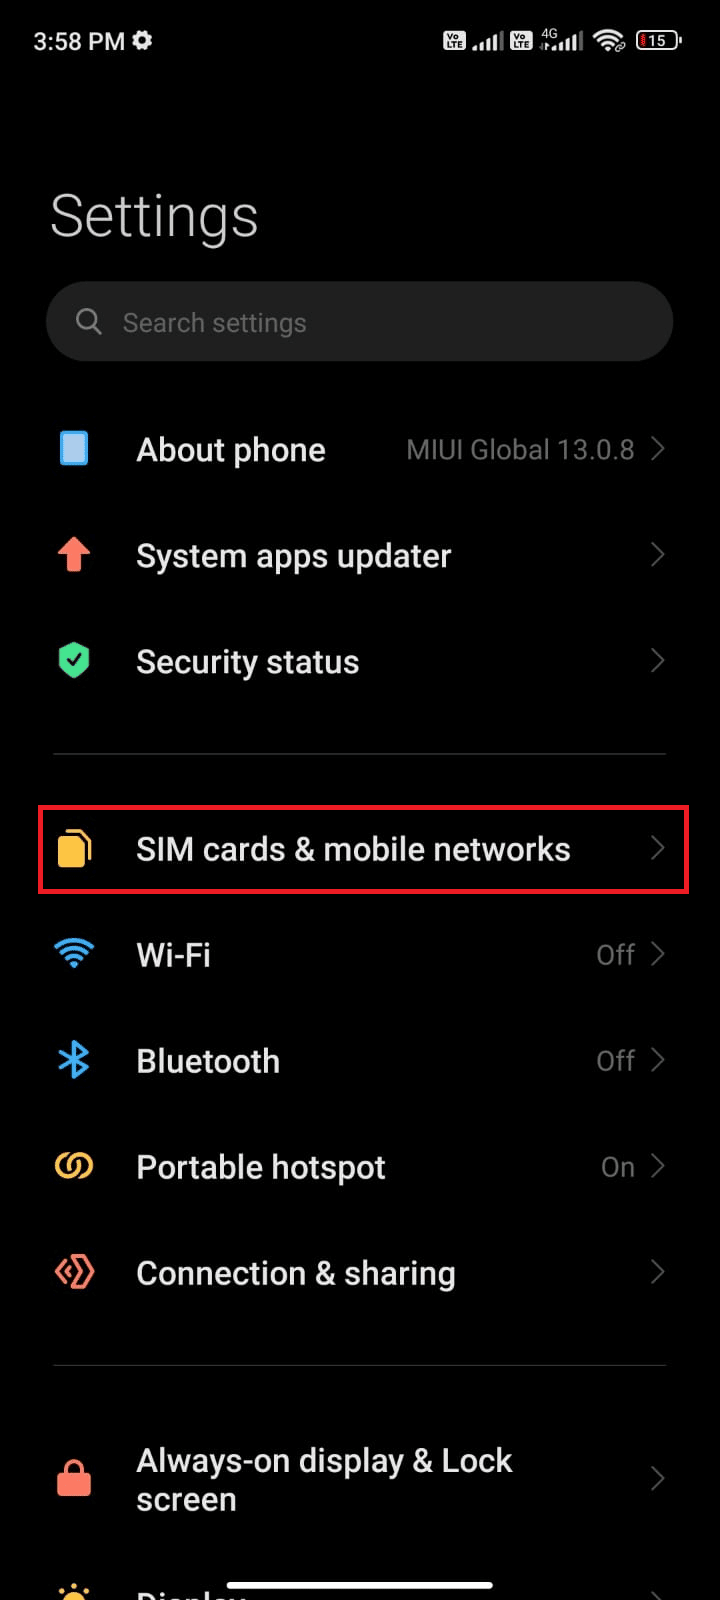 tap the SIM cards mobile networks option 